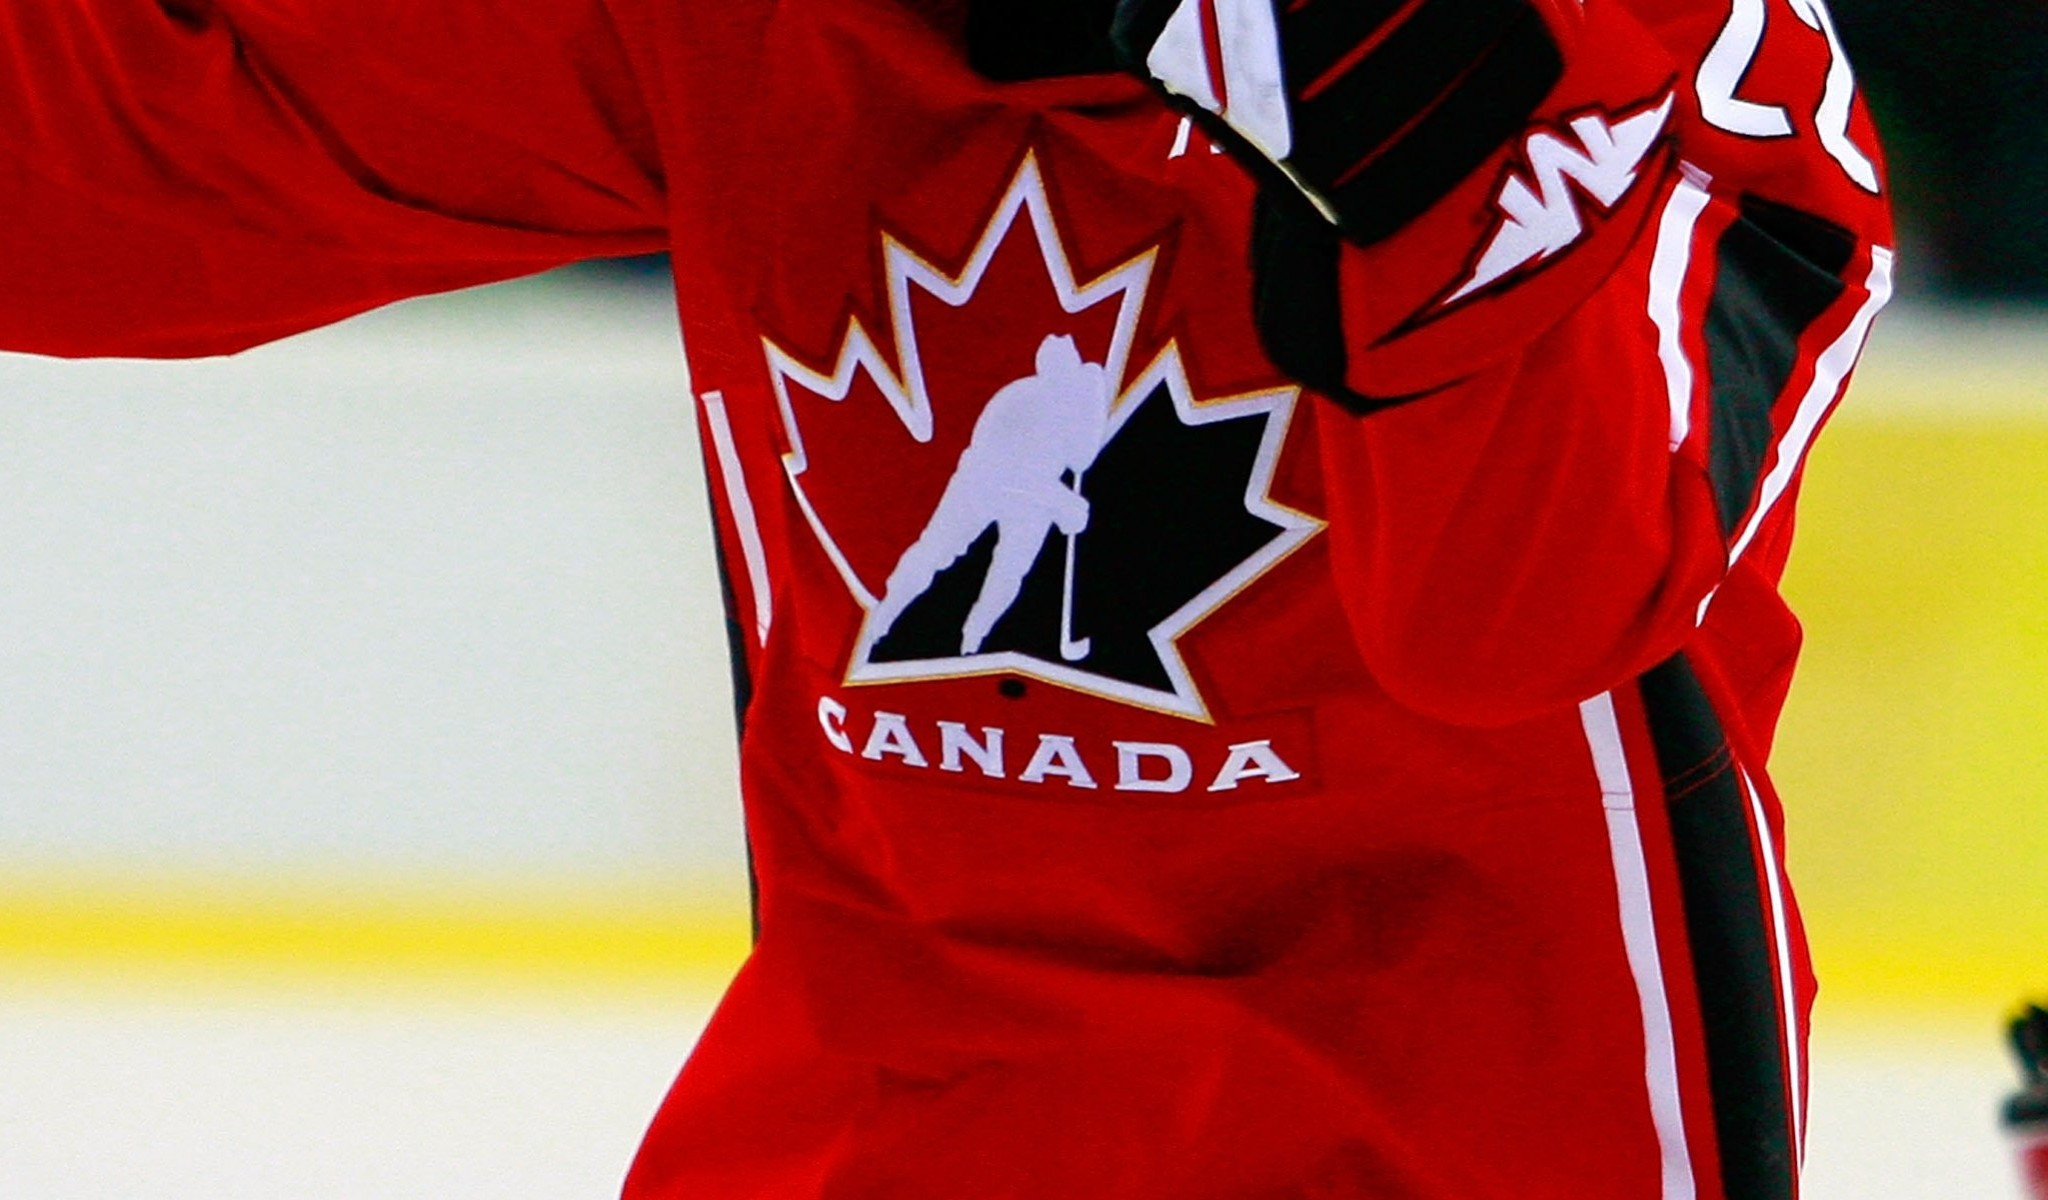 Hockey Canada publishes action plan tackling "toxic behavior" and pledges further reforms